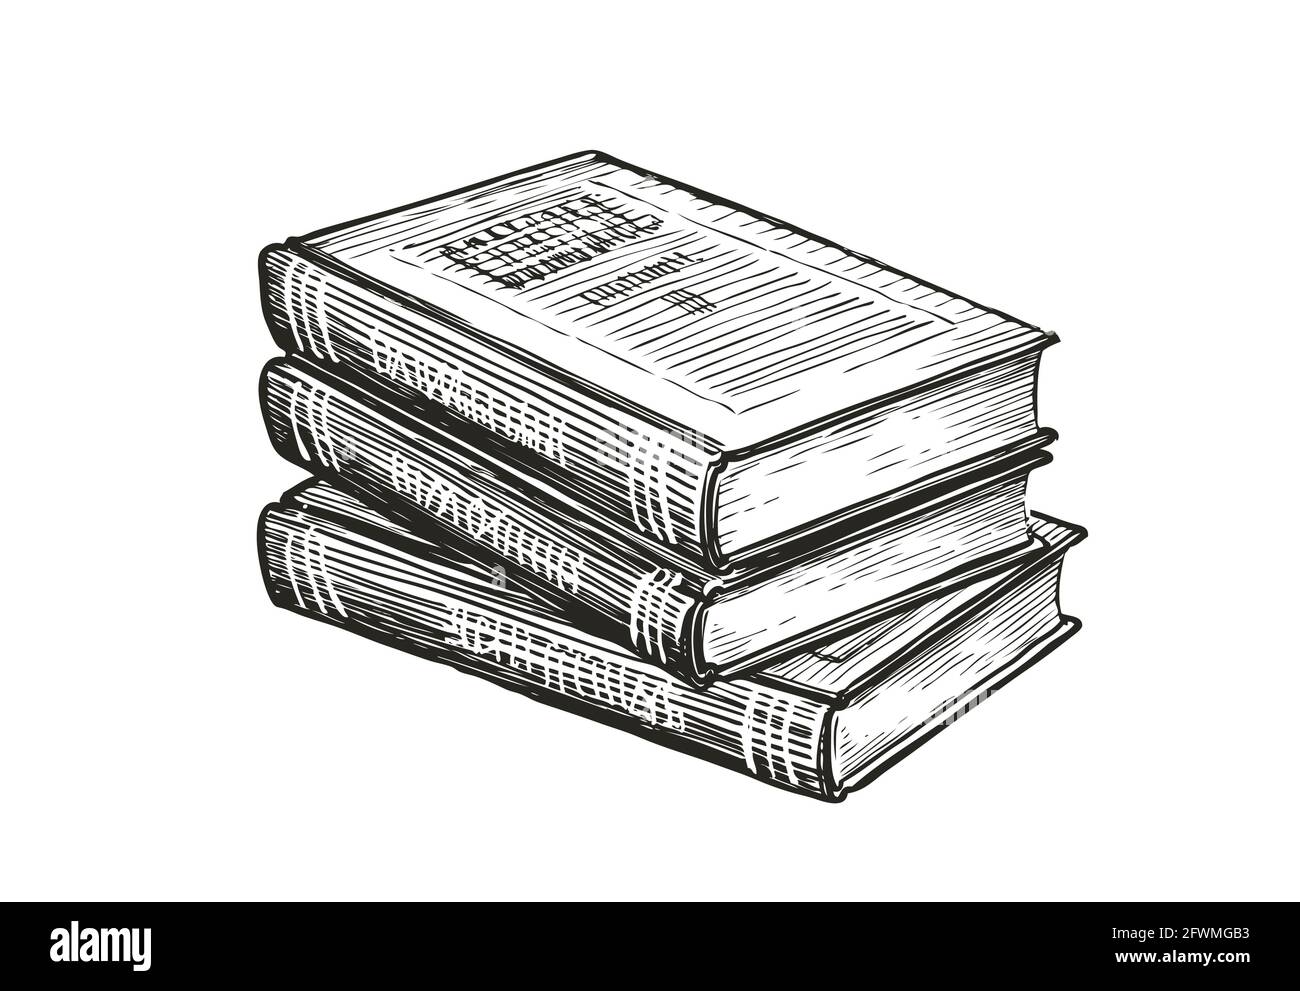 Stack of books. Literature, education concept in vintage style. Hand drawn vector illustration Stock Vector